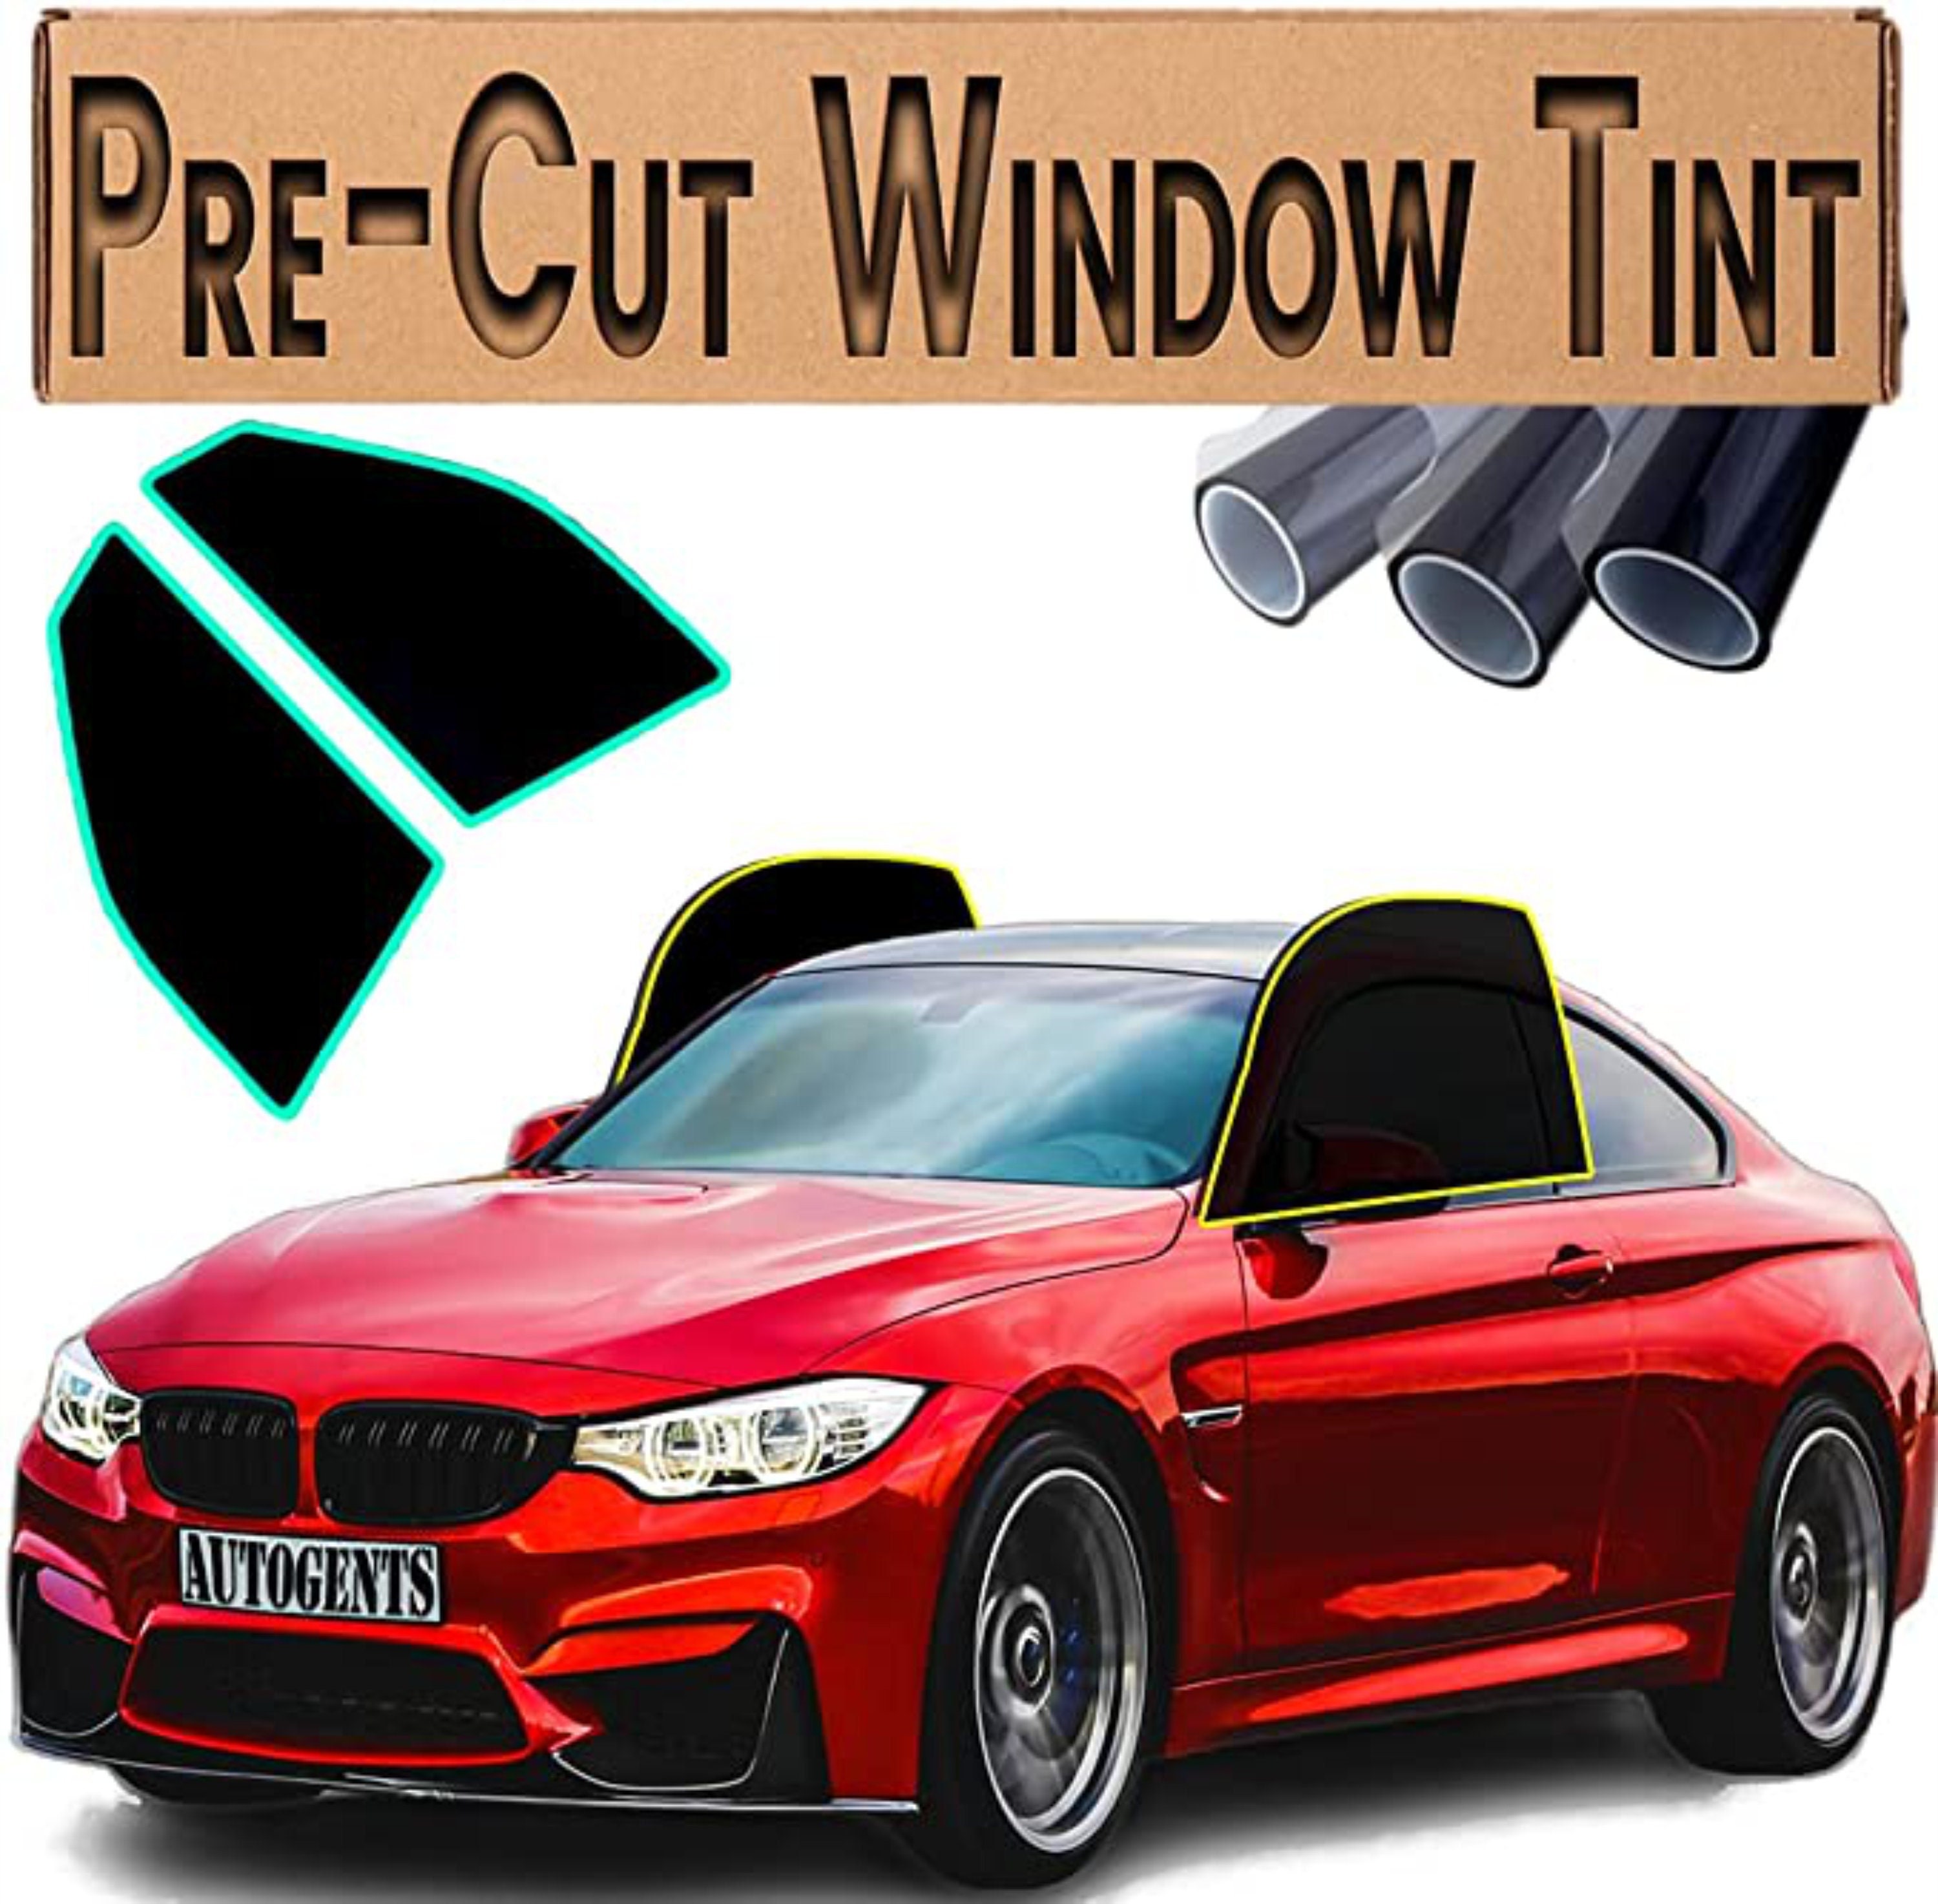 Napoax DIY Ceramic Car Window Tint Kit - Pre-Cut Customizable Tints - Free  Tool Set with Blades, Slip Solution, Squeegees, Spray Bottle - 5% to 70%